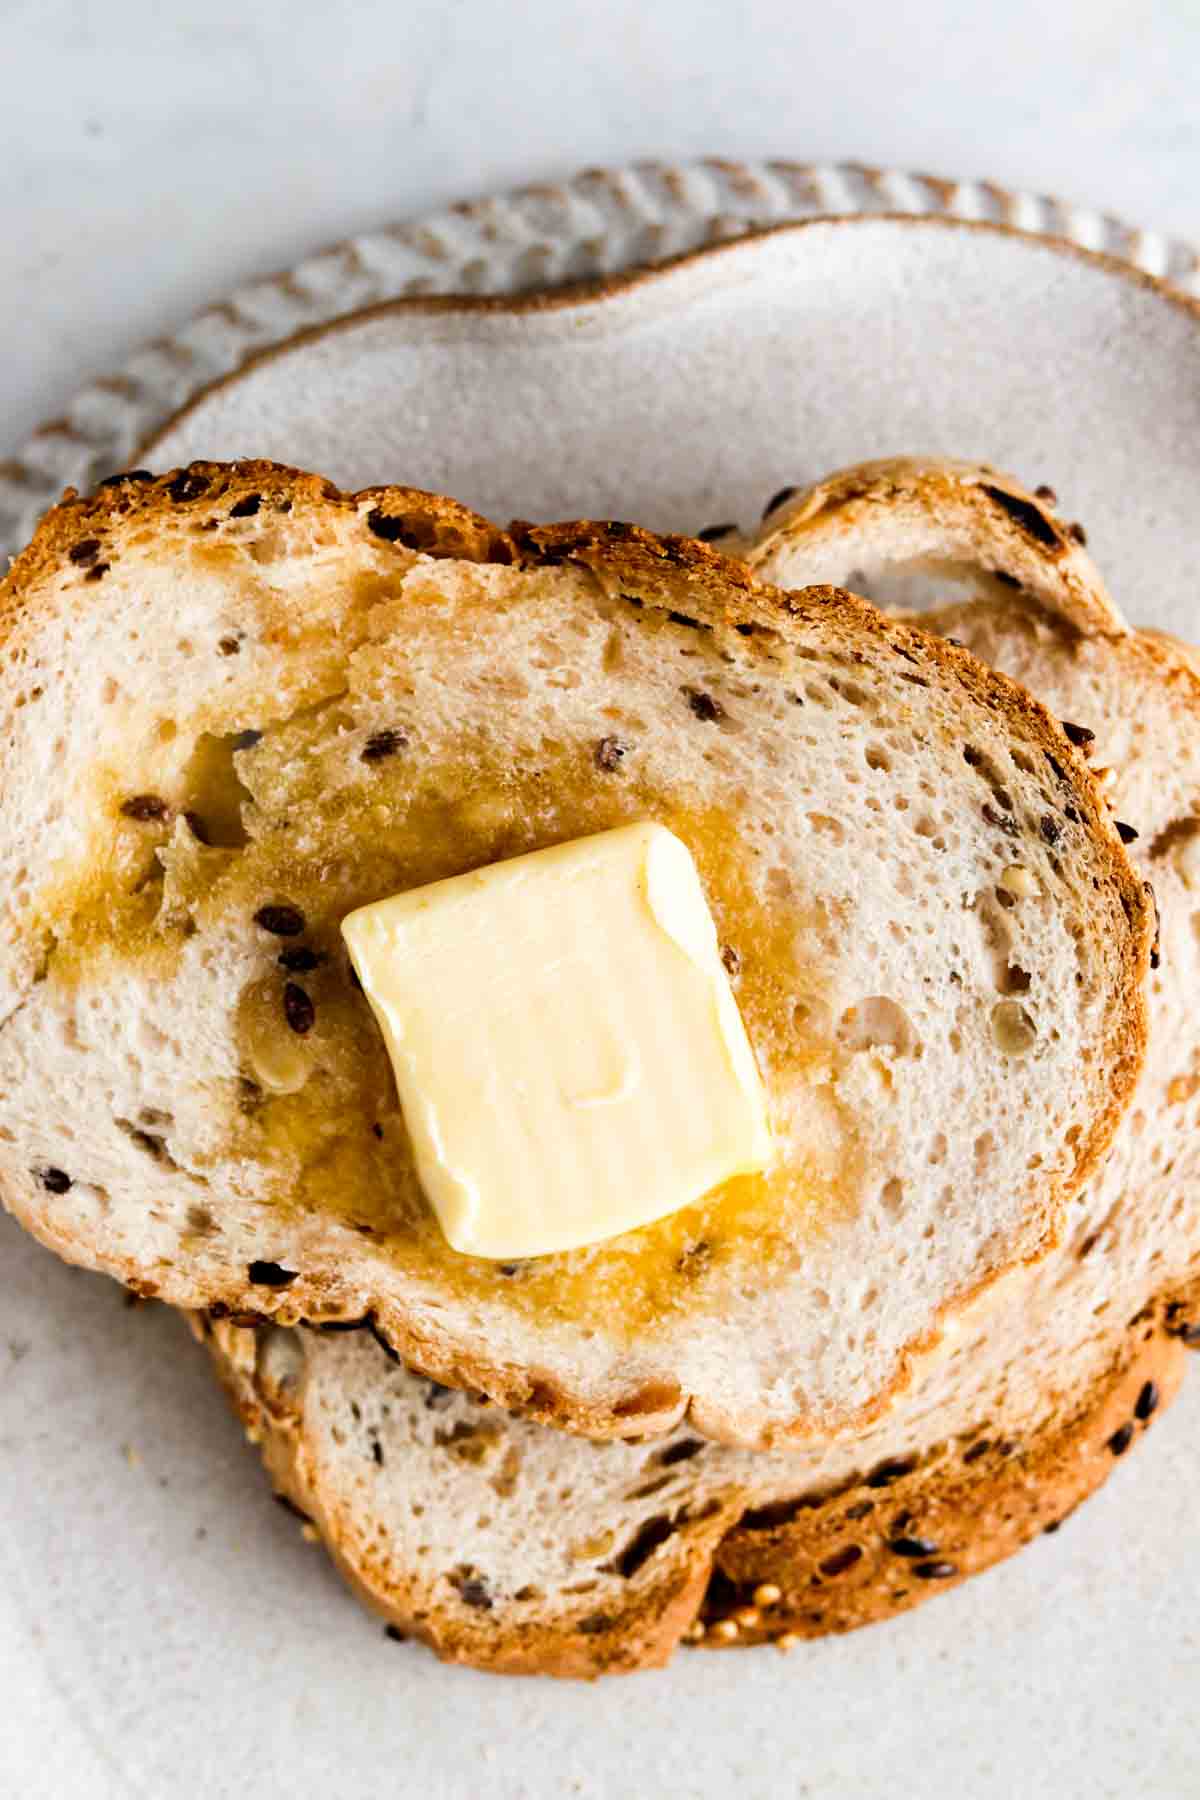 Toast on a plate with a pad of butter.